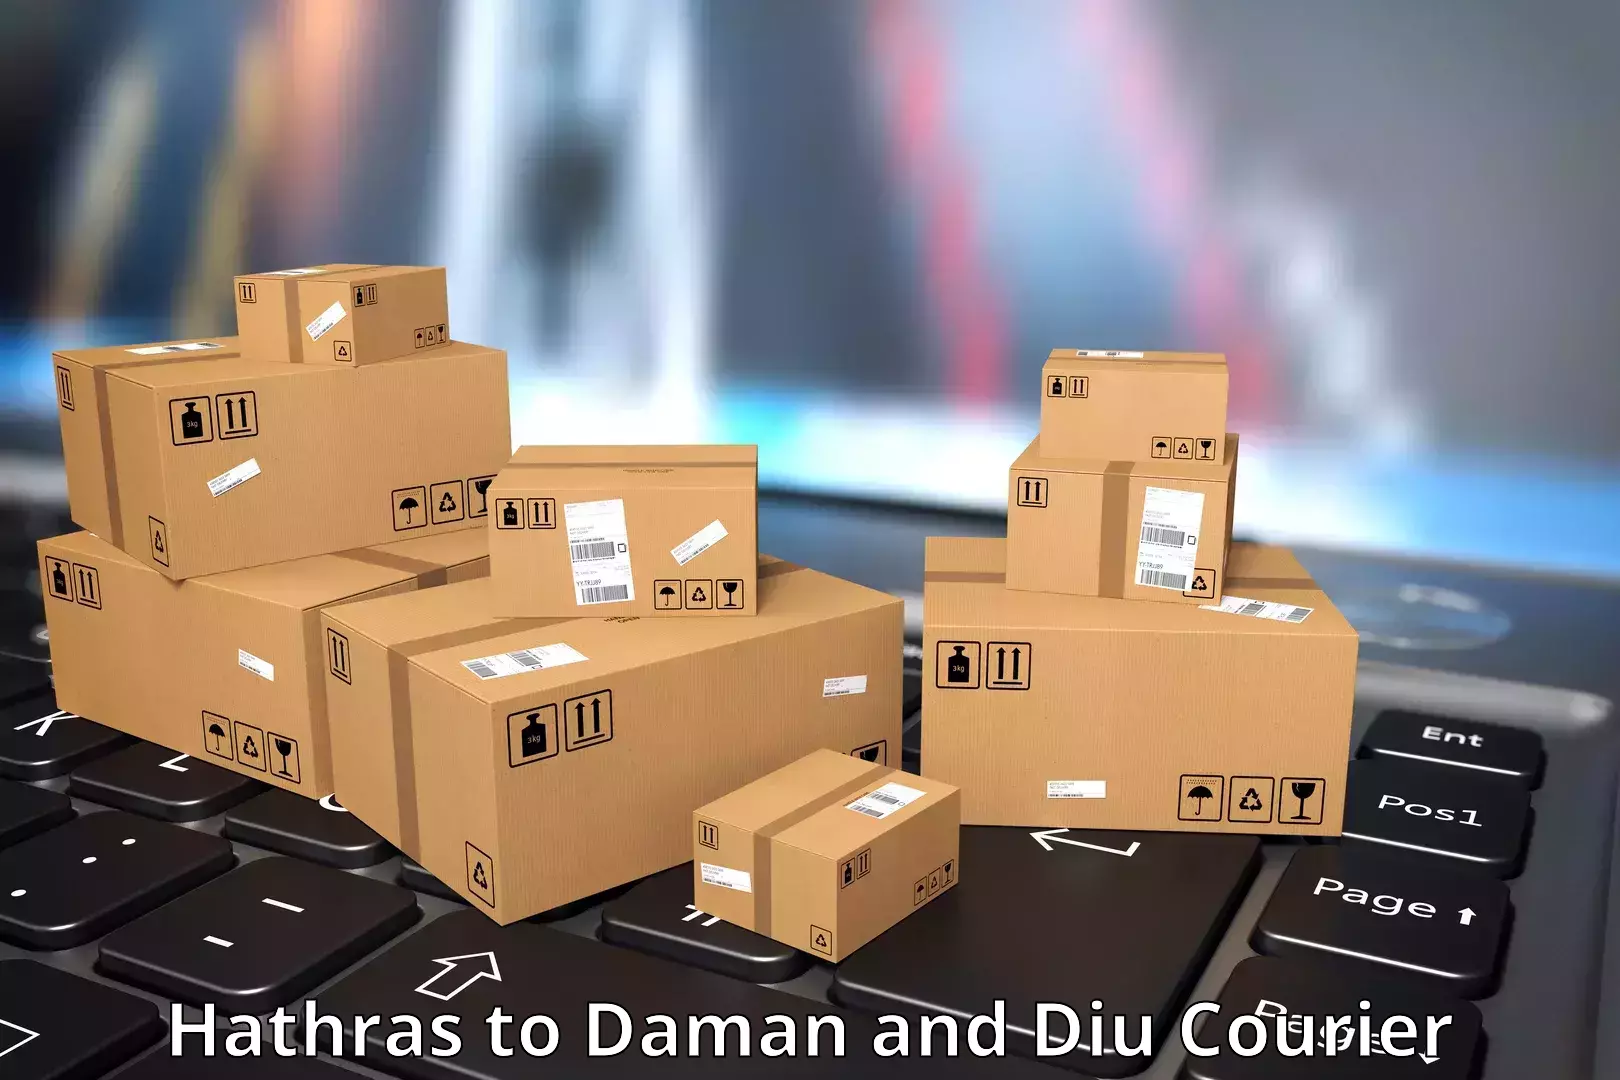 Enhanced tracking features Hathras to Daman and Diu